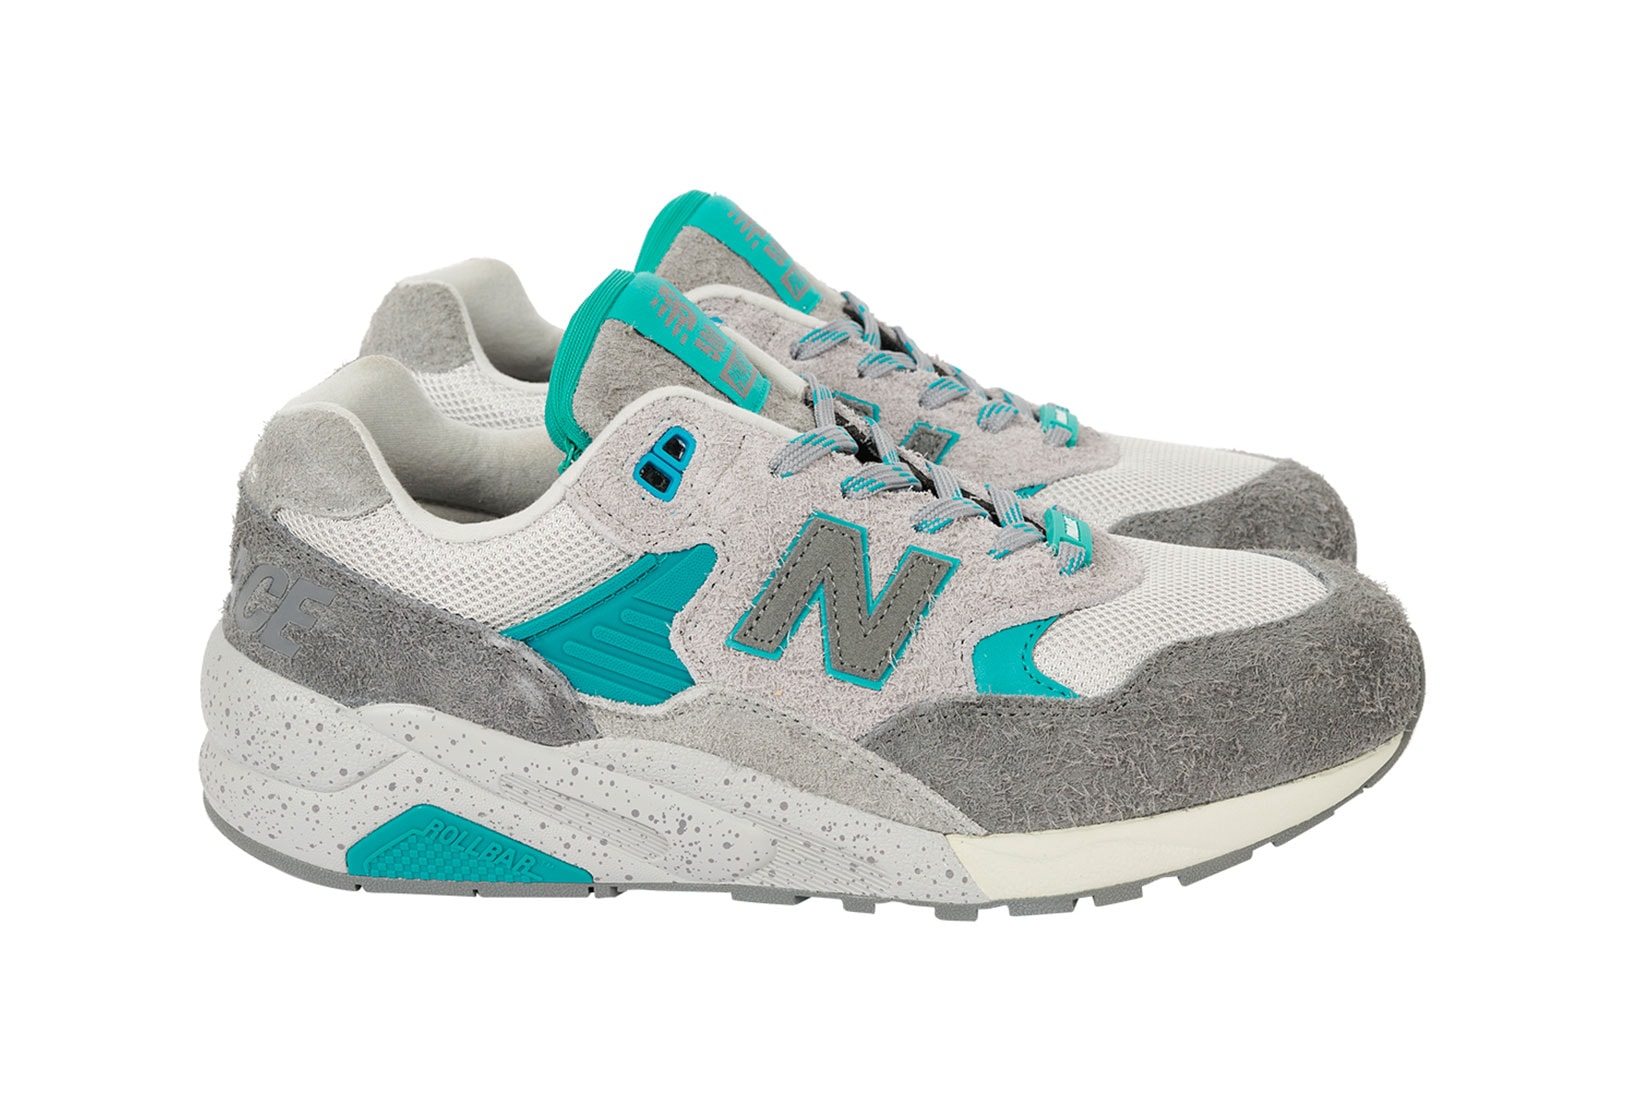 Palace New Balance 580 Collaboration Sneakers Official Images Release Date